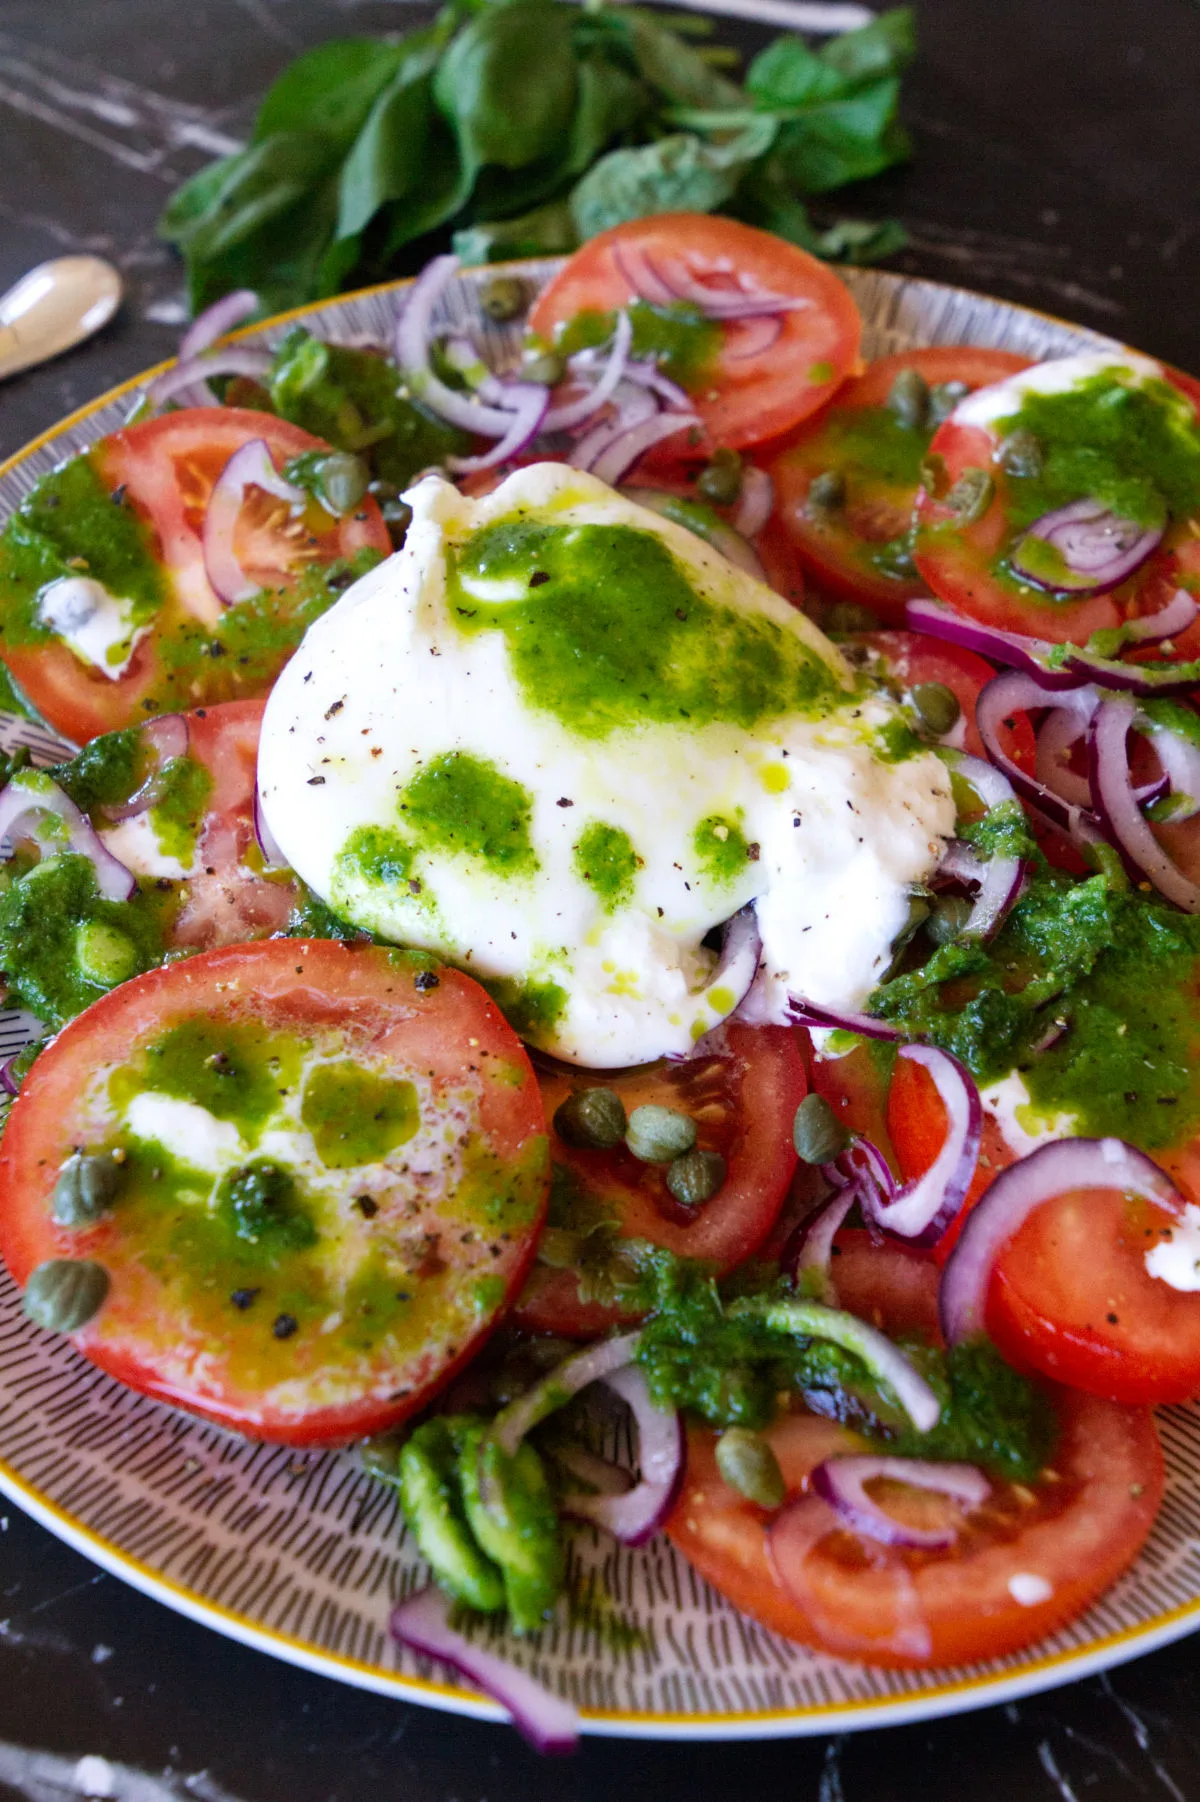 basil and garlic dressing drizzled over a tomato burrata salad. 